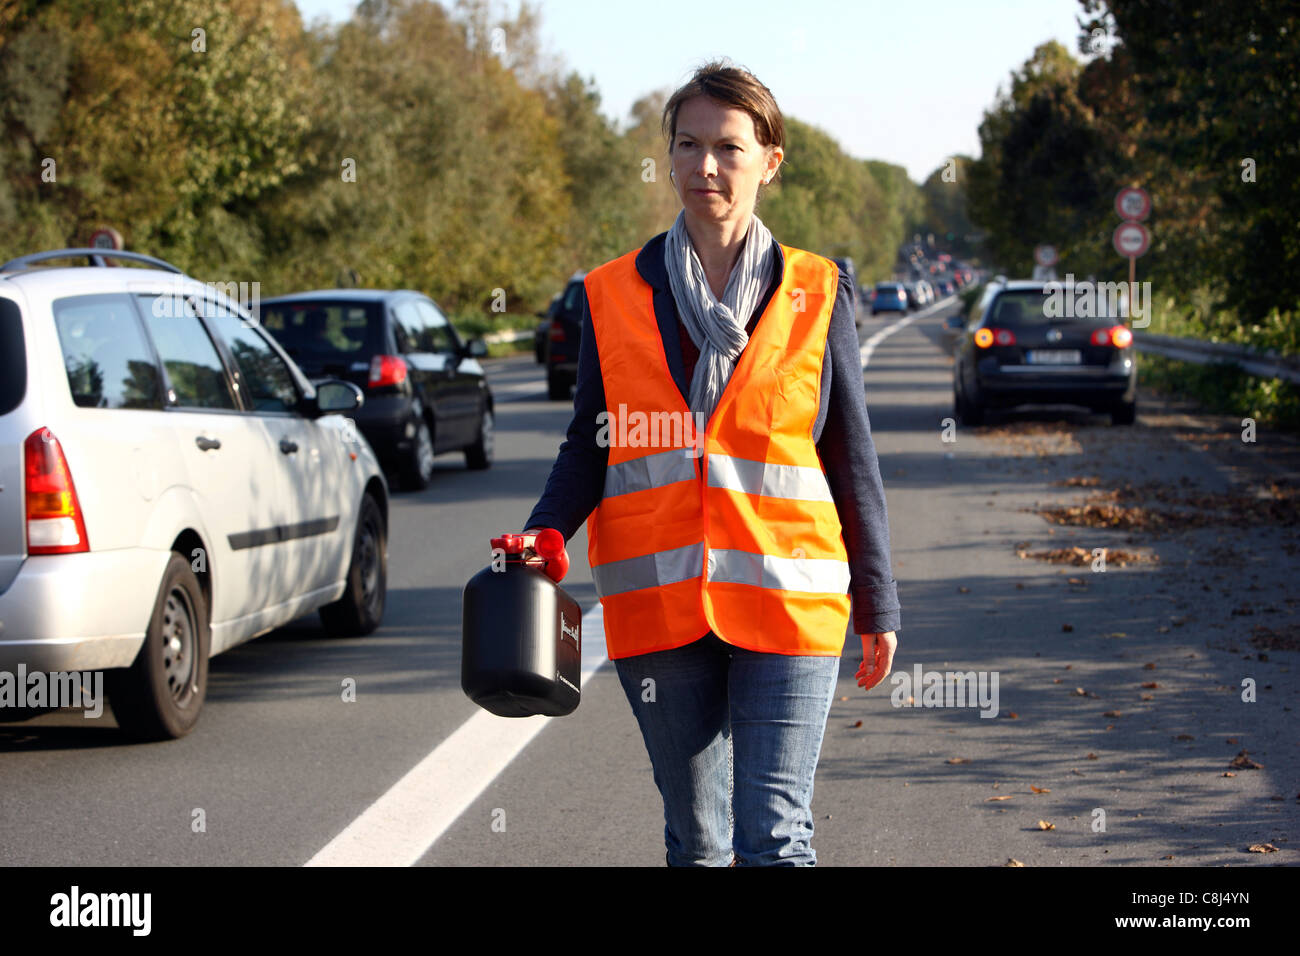 Car breakdown, out of fuel, empty tank. Female driver, is walking with a spare can to the next service station, to get fuel. Stock Photo